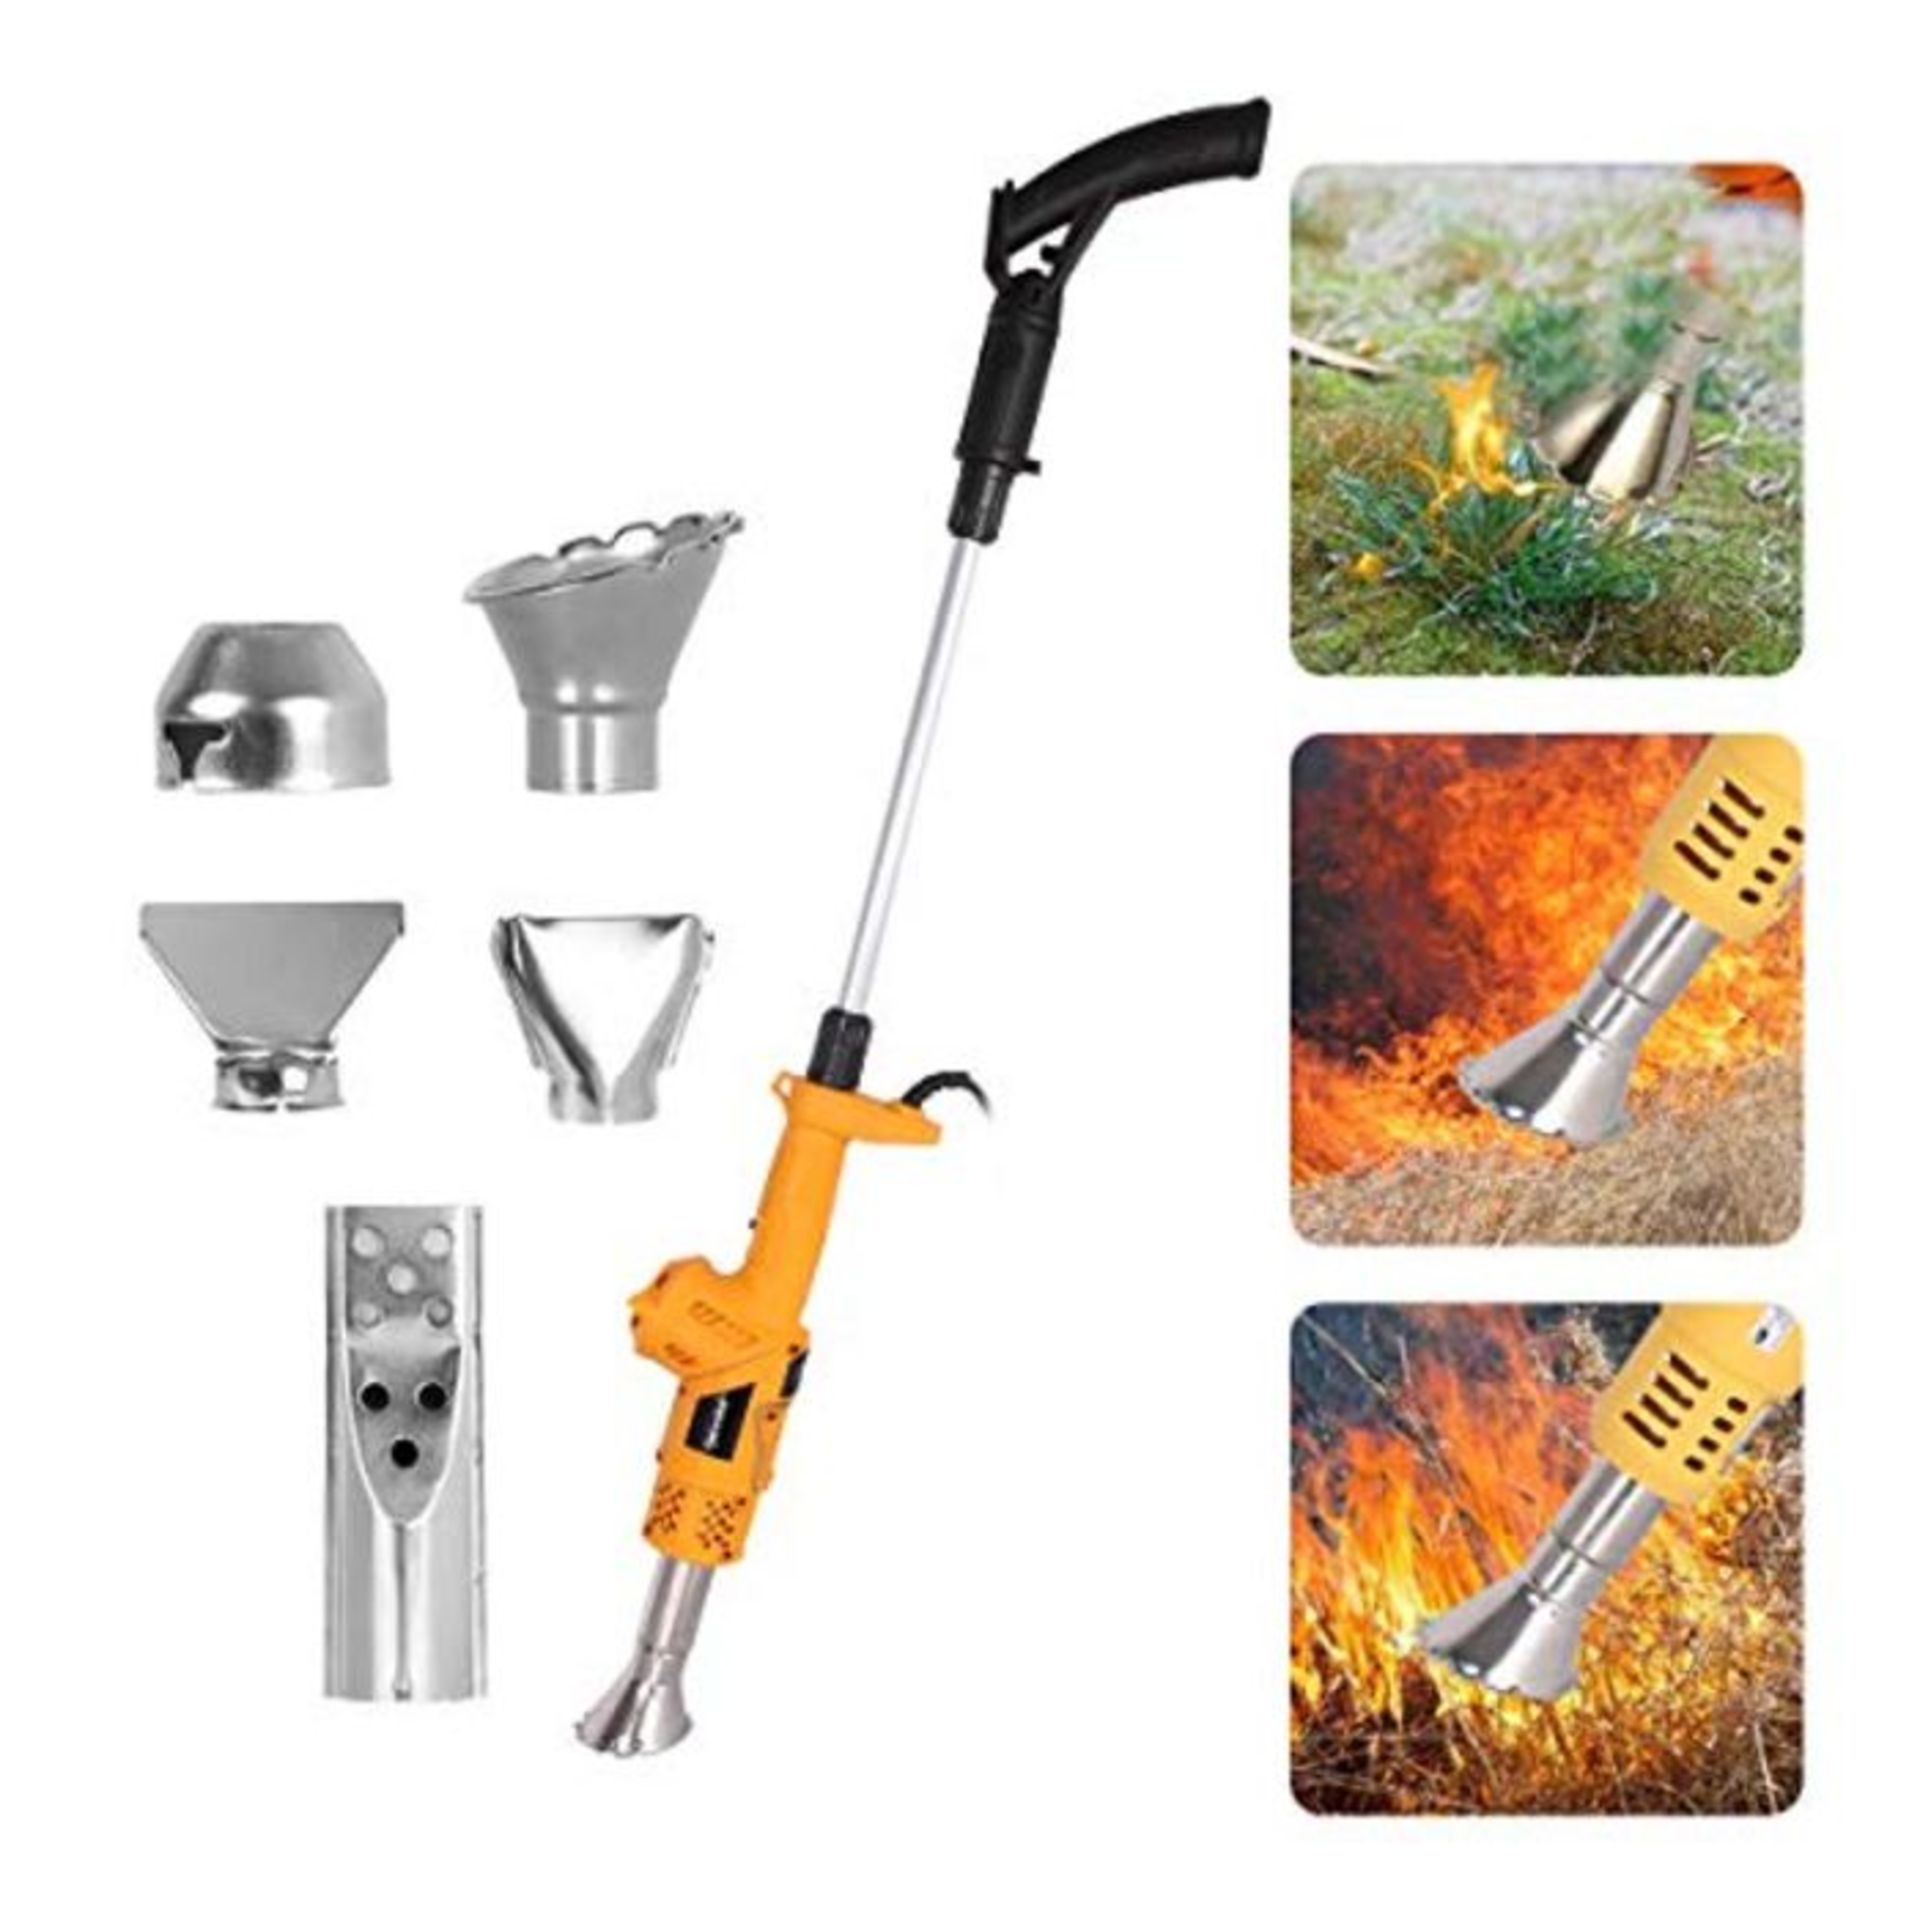 Electric Weed Burner 2M Cable 2000W Garden Gear Weed Burner Hot Air Weed Killer 5-in-1